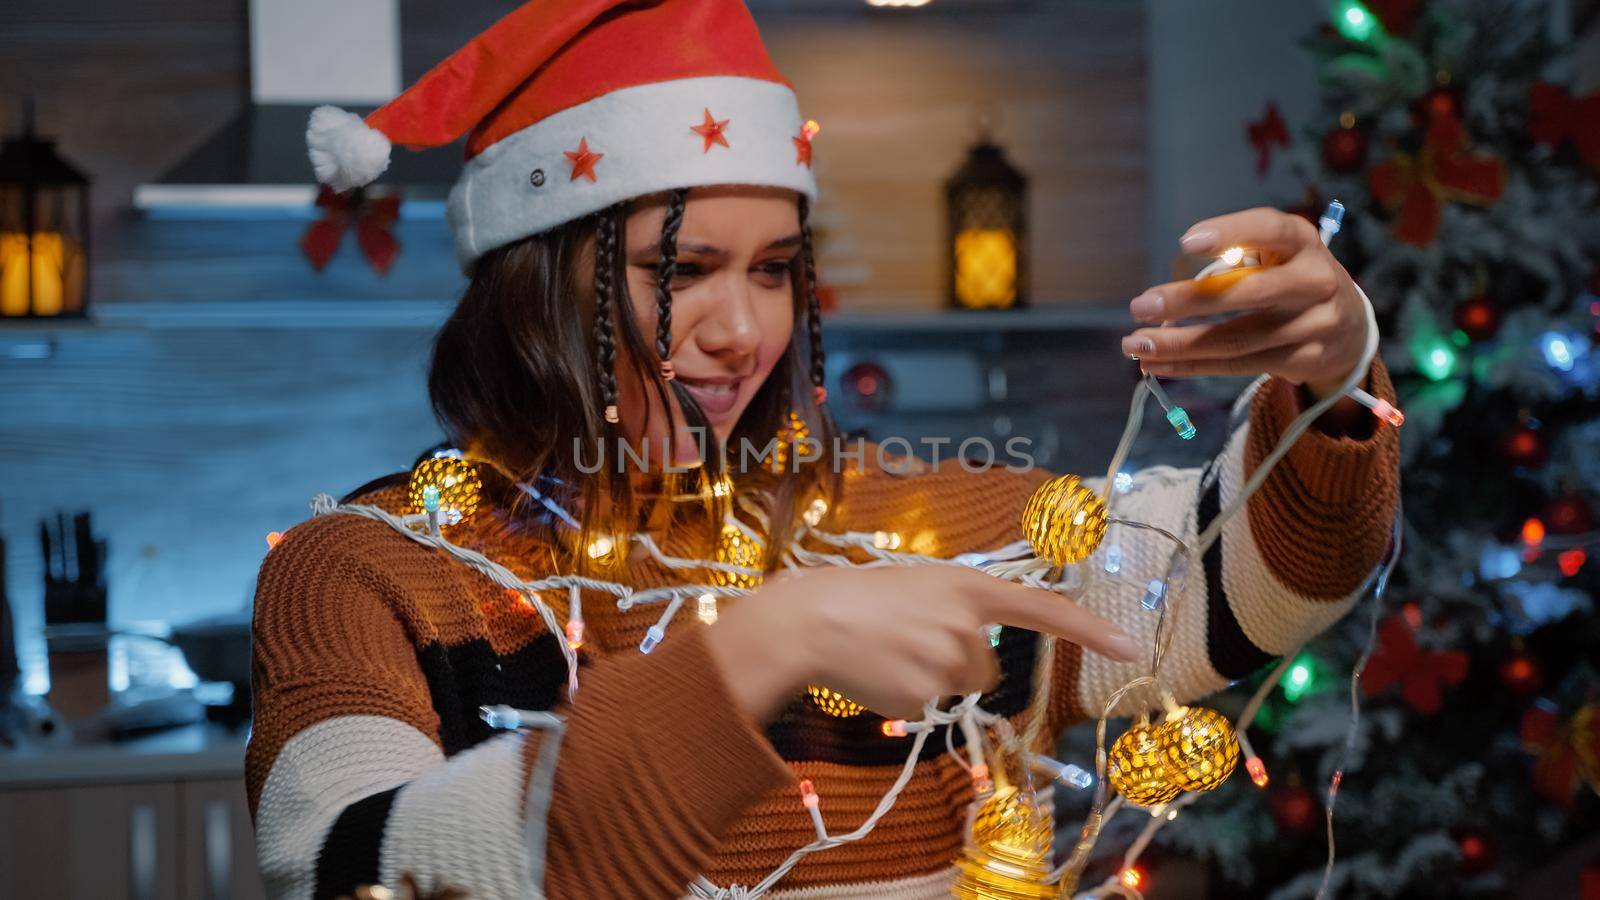 Cheerful woman laughing at tangled rope with lights for christmas decorating. Young adult using ornaments and garland preparing for holiday festivity and december celebration party